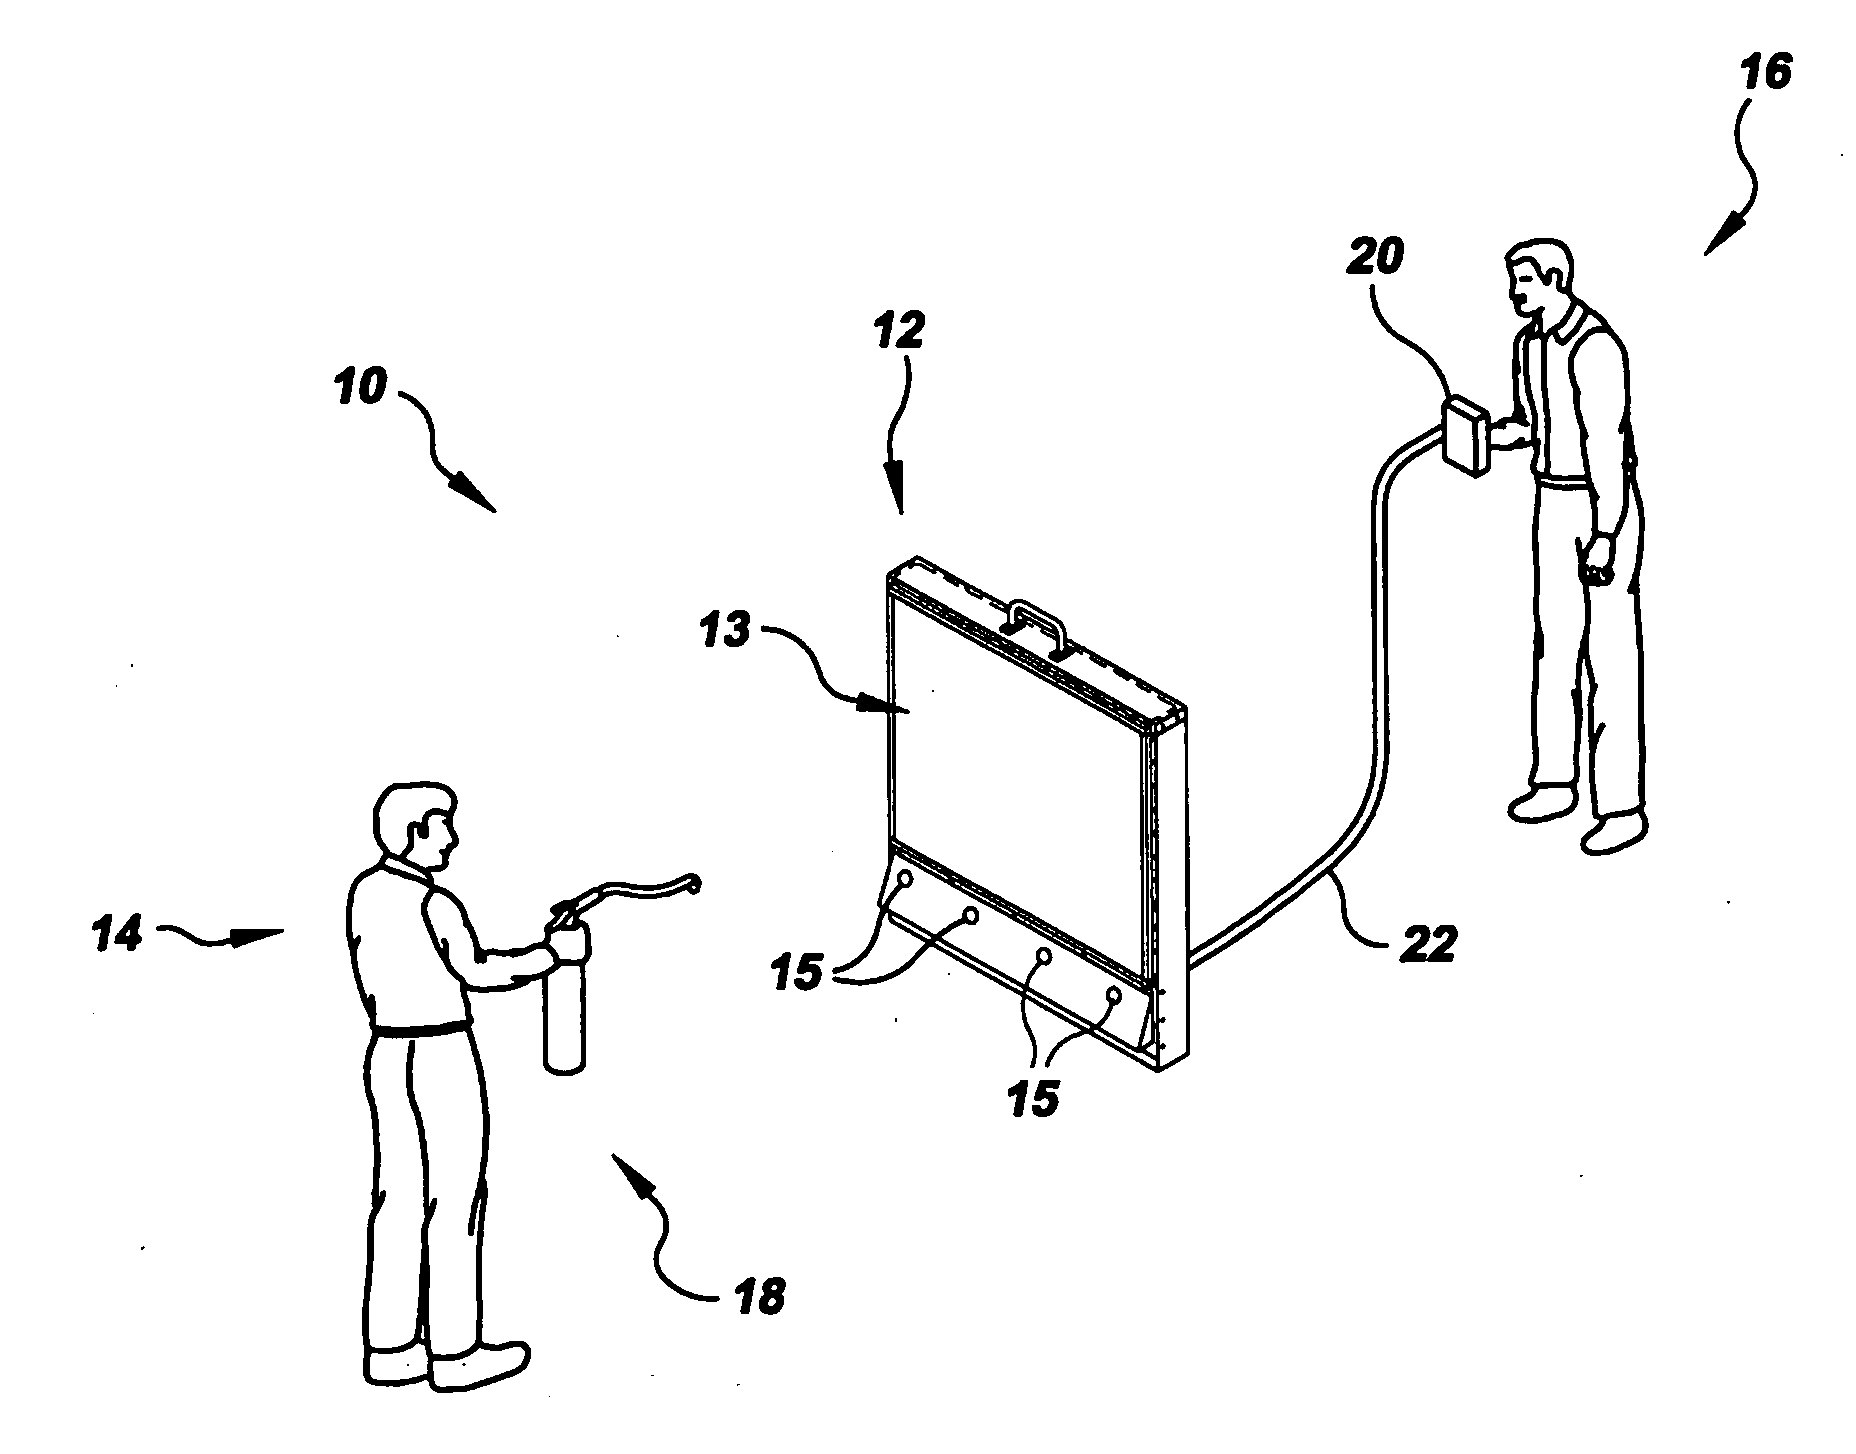 Flameless fire extinguisher training methods and apparatus